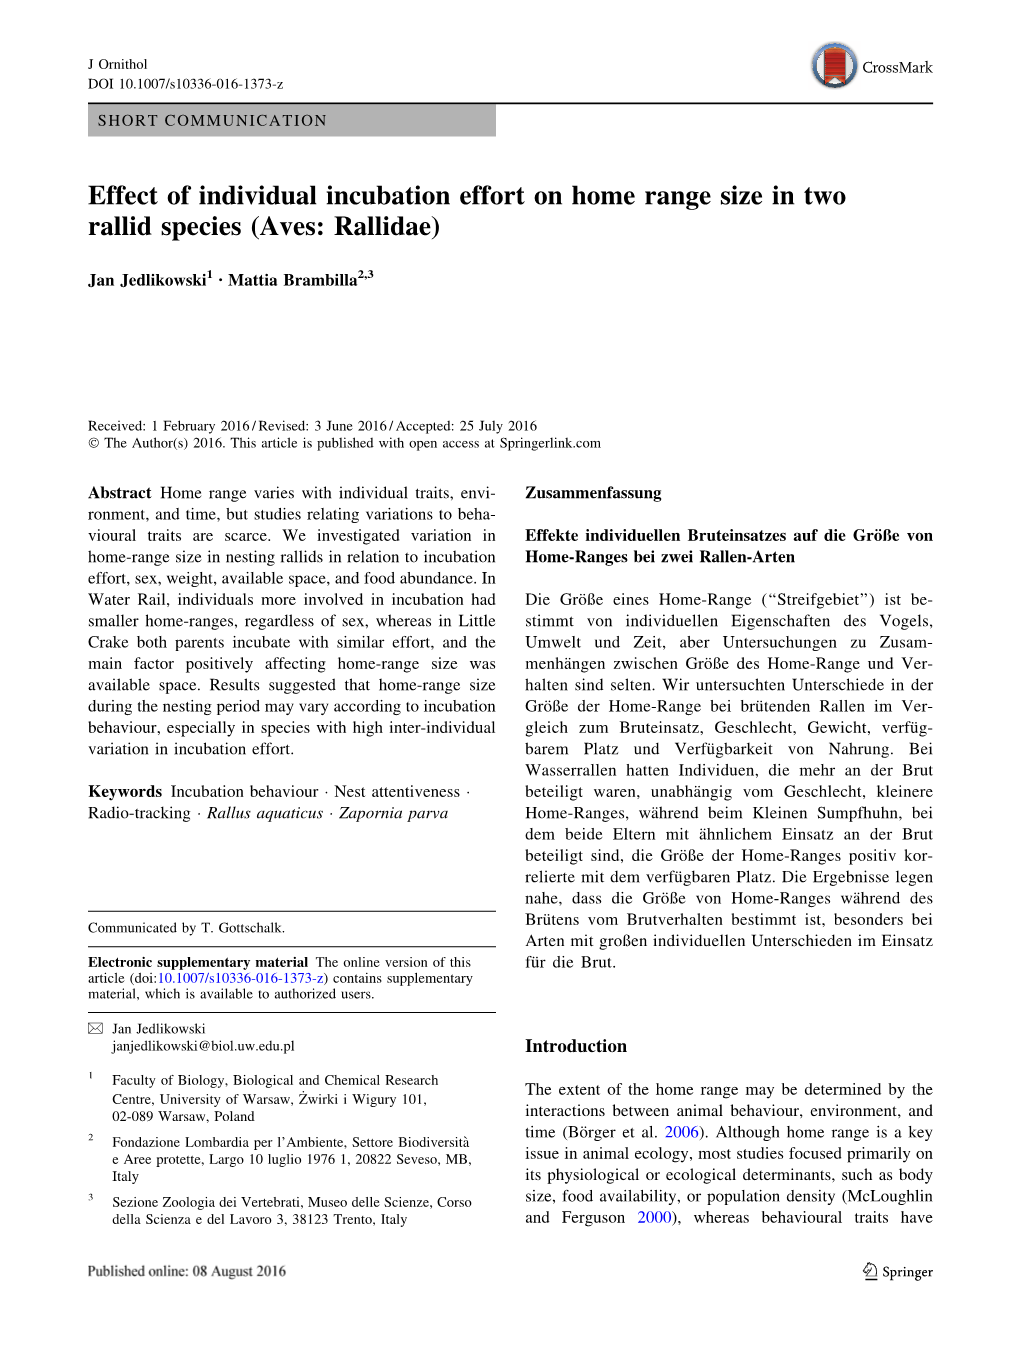 Effect of Individual Incubation Effort on Home Range Size in Two Rallid Species (Aves: Rallidae)